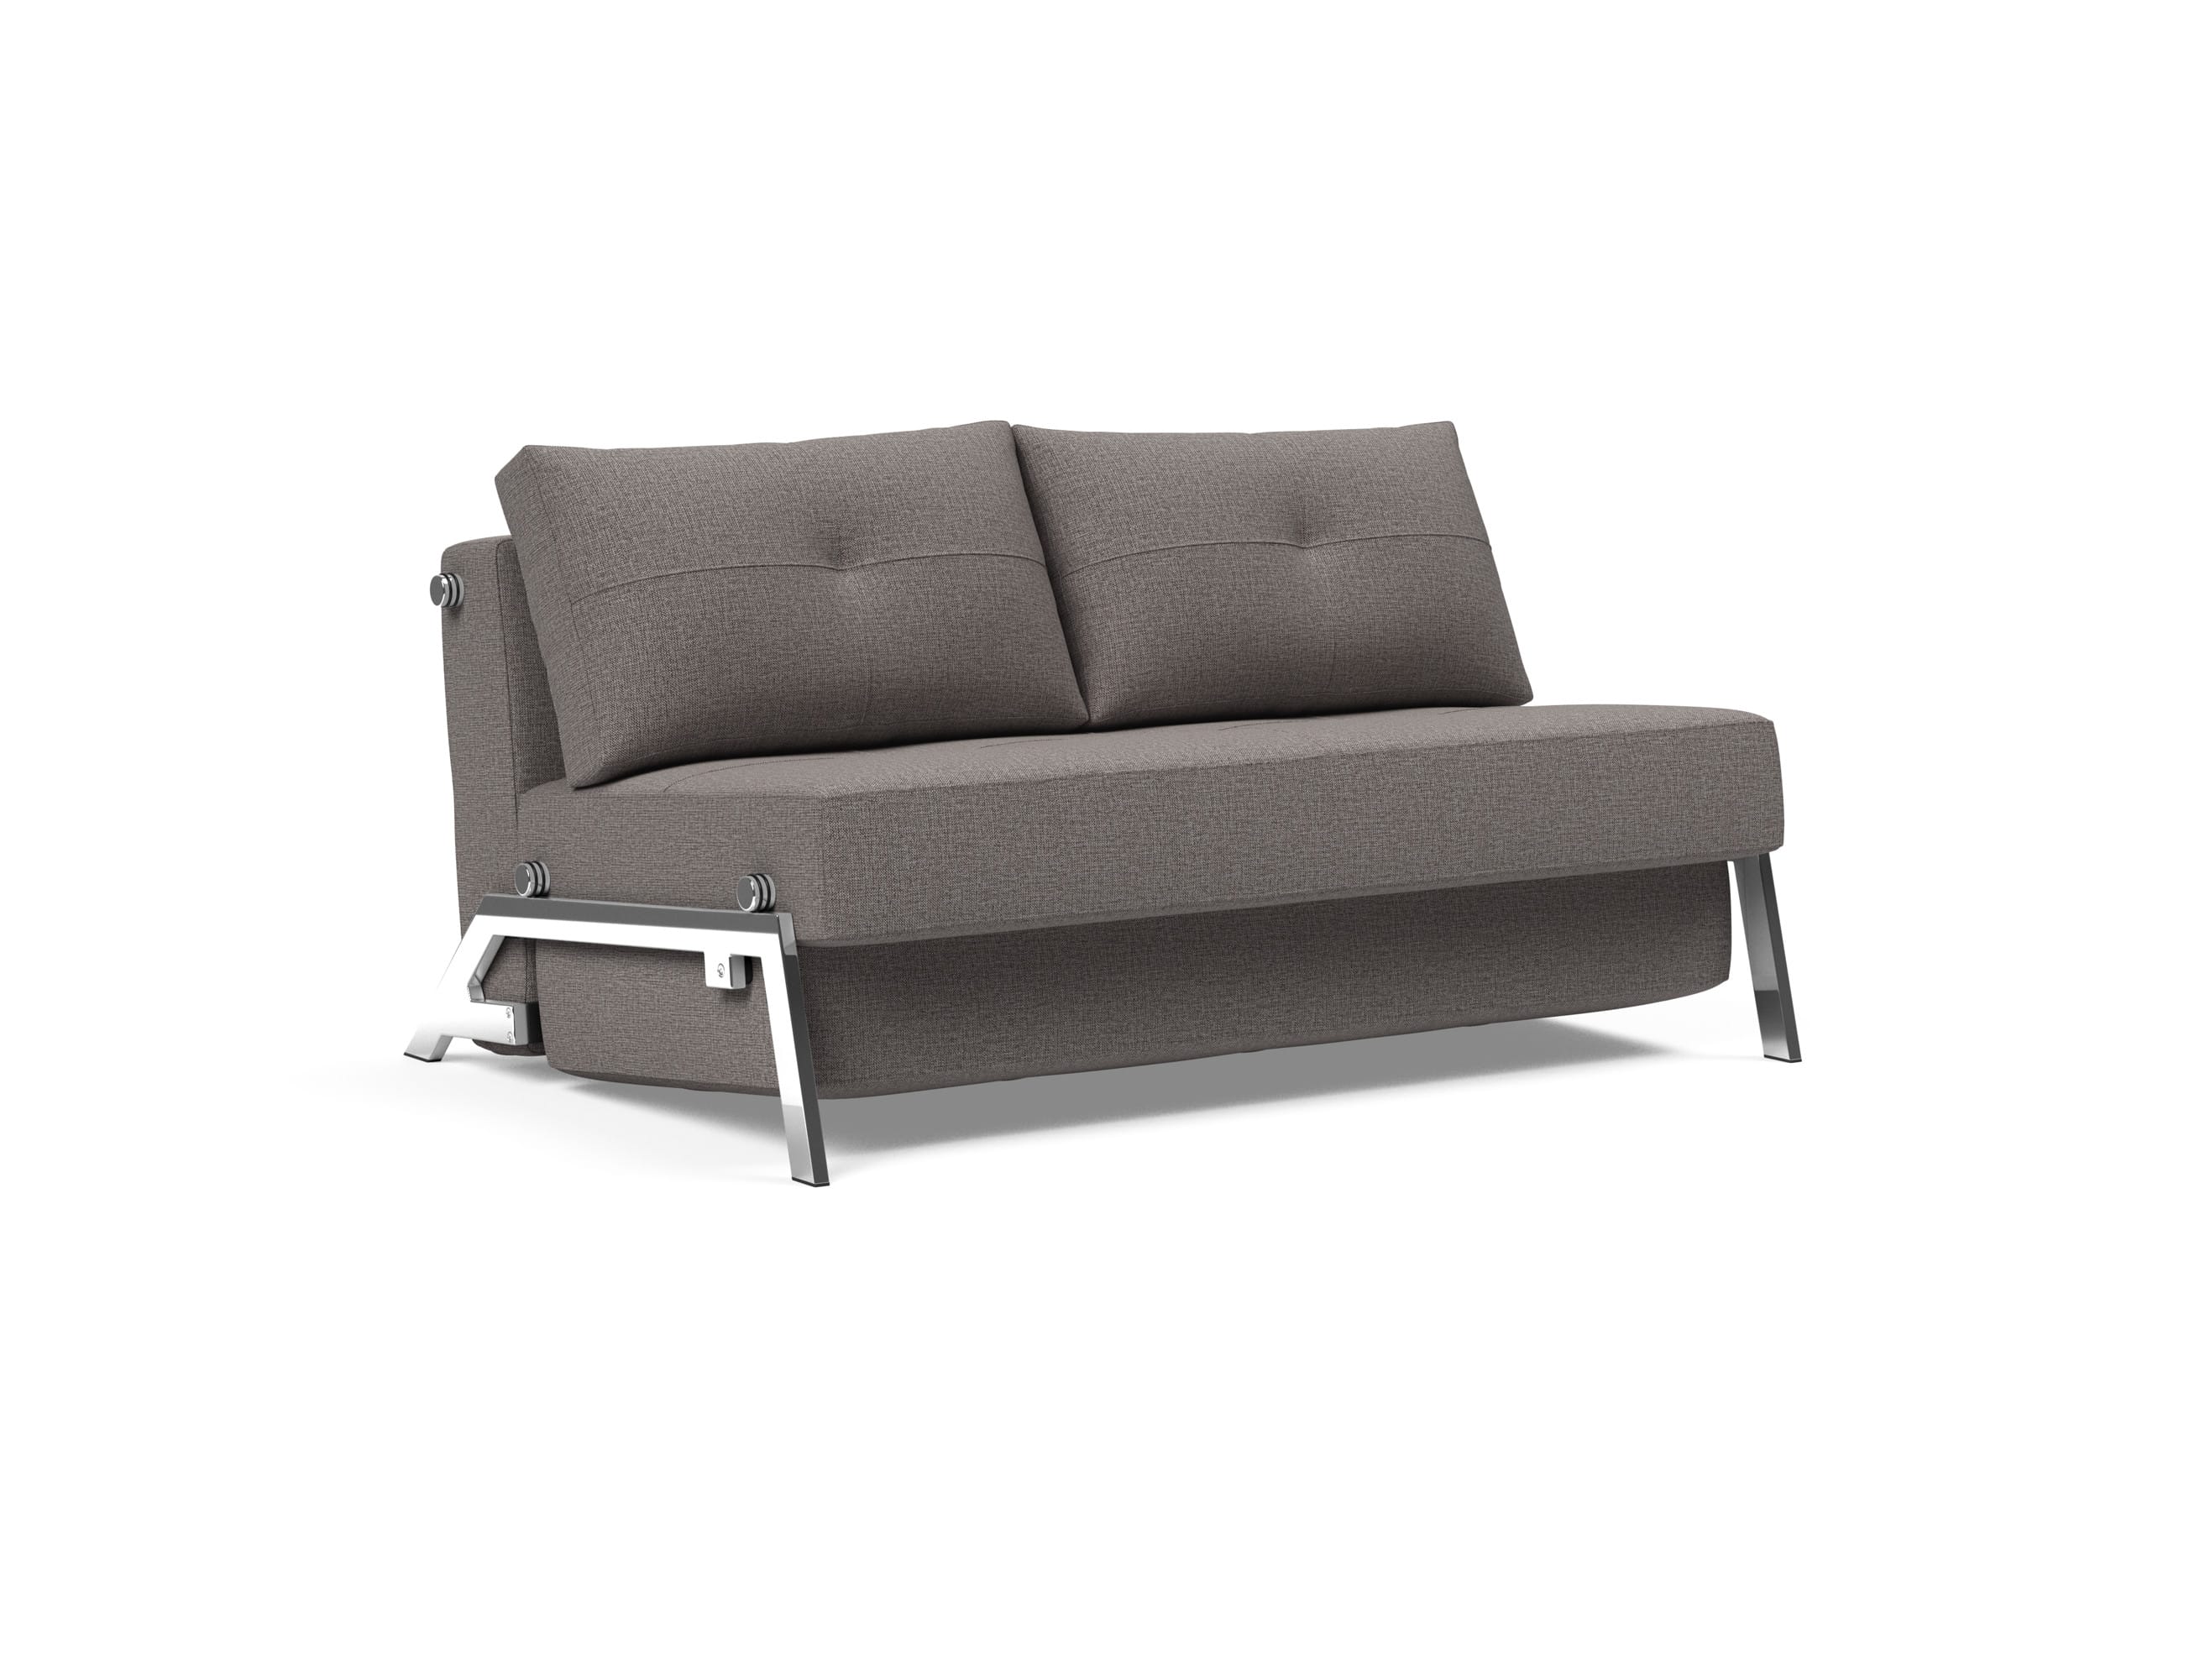 Cubed Deluxe Sofa Bed (Full Size) Mixed Dance Gray by Innovation